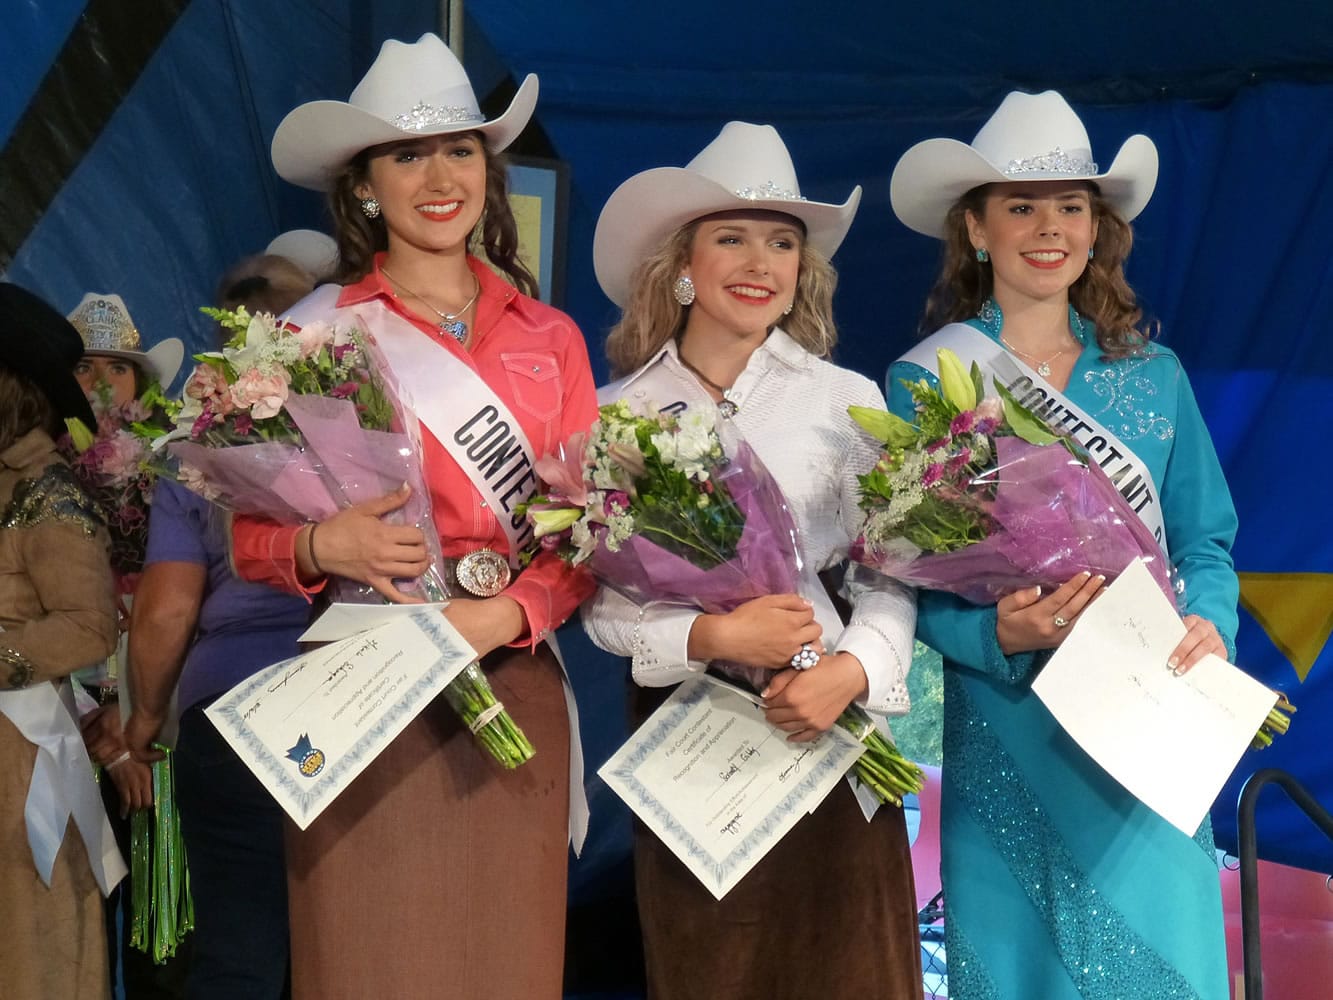 Ridgefield: The 2016 Clark County Fair Court, from left: Mikaela Schuman, Serenity Gibbs and Shaylee Coleman.